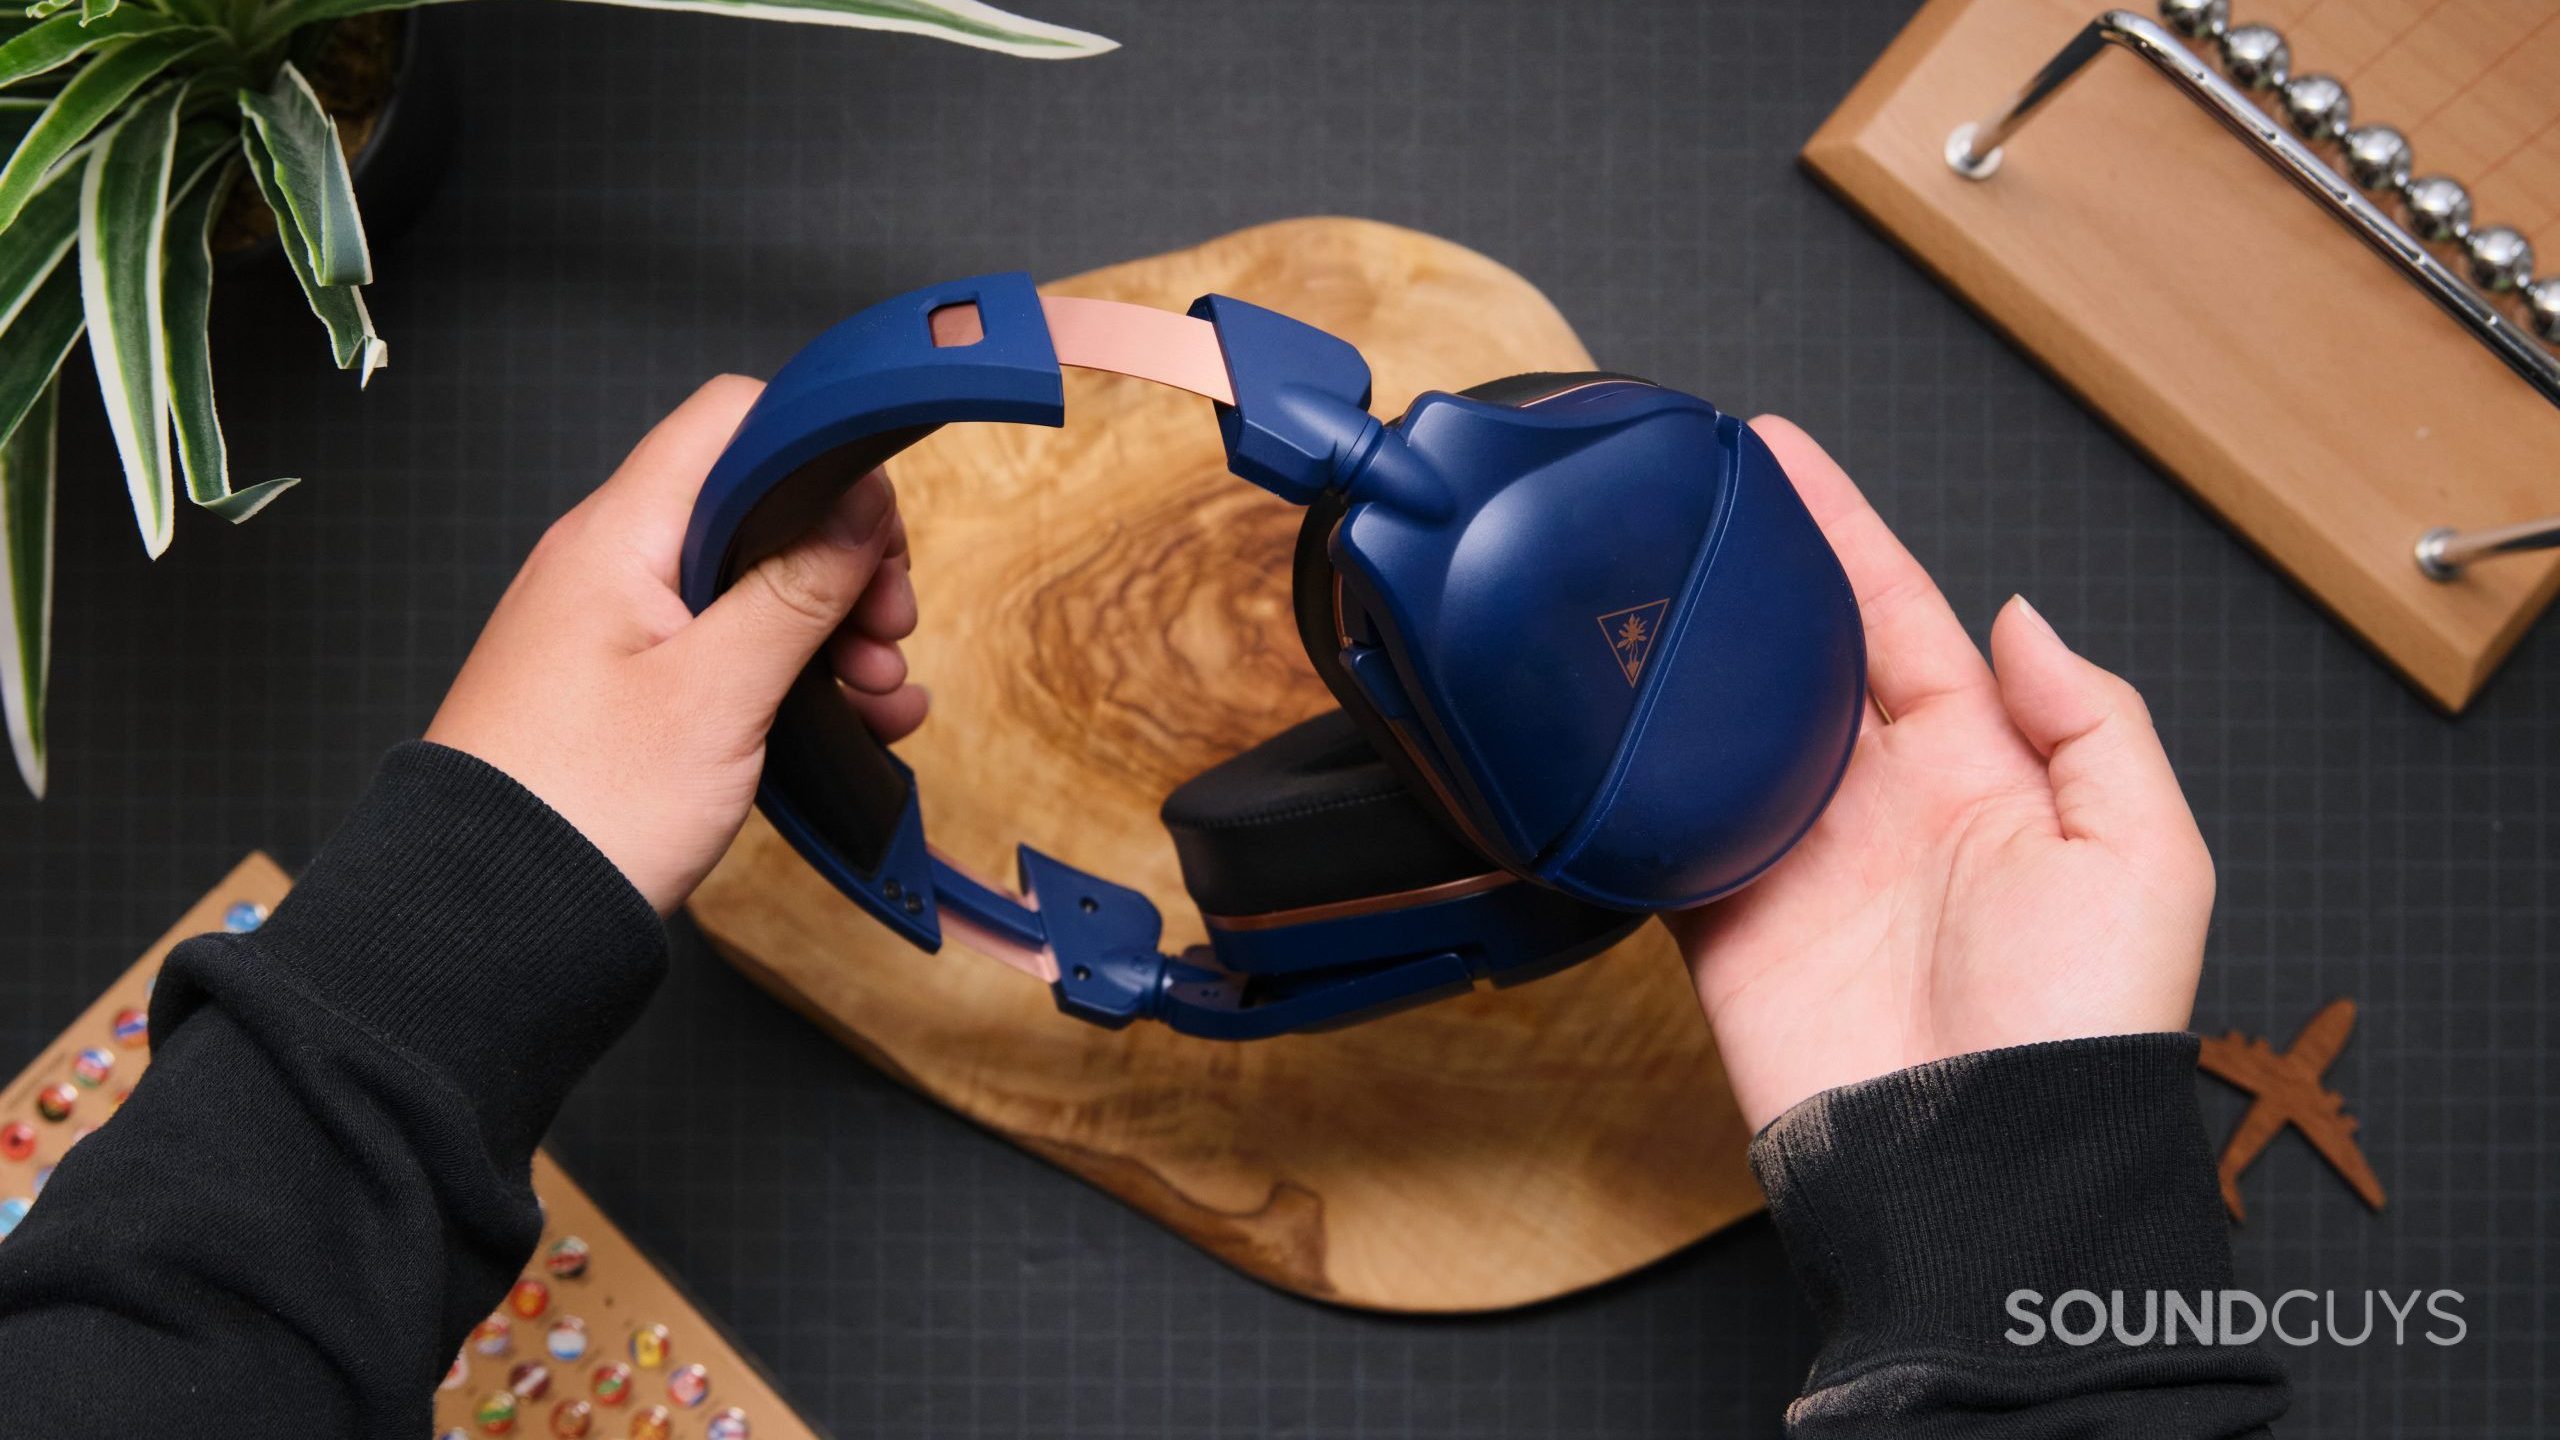 The Turtle Beach Stealth 700 Gen 2 MAX being held in two hands.